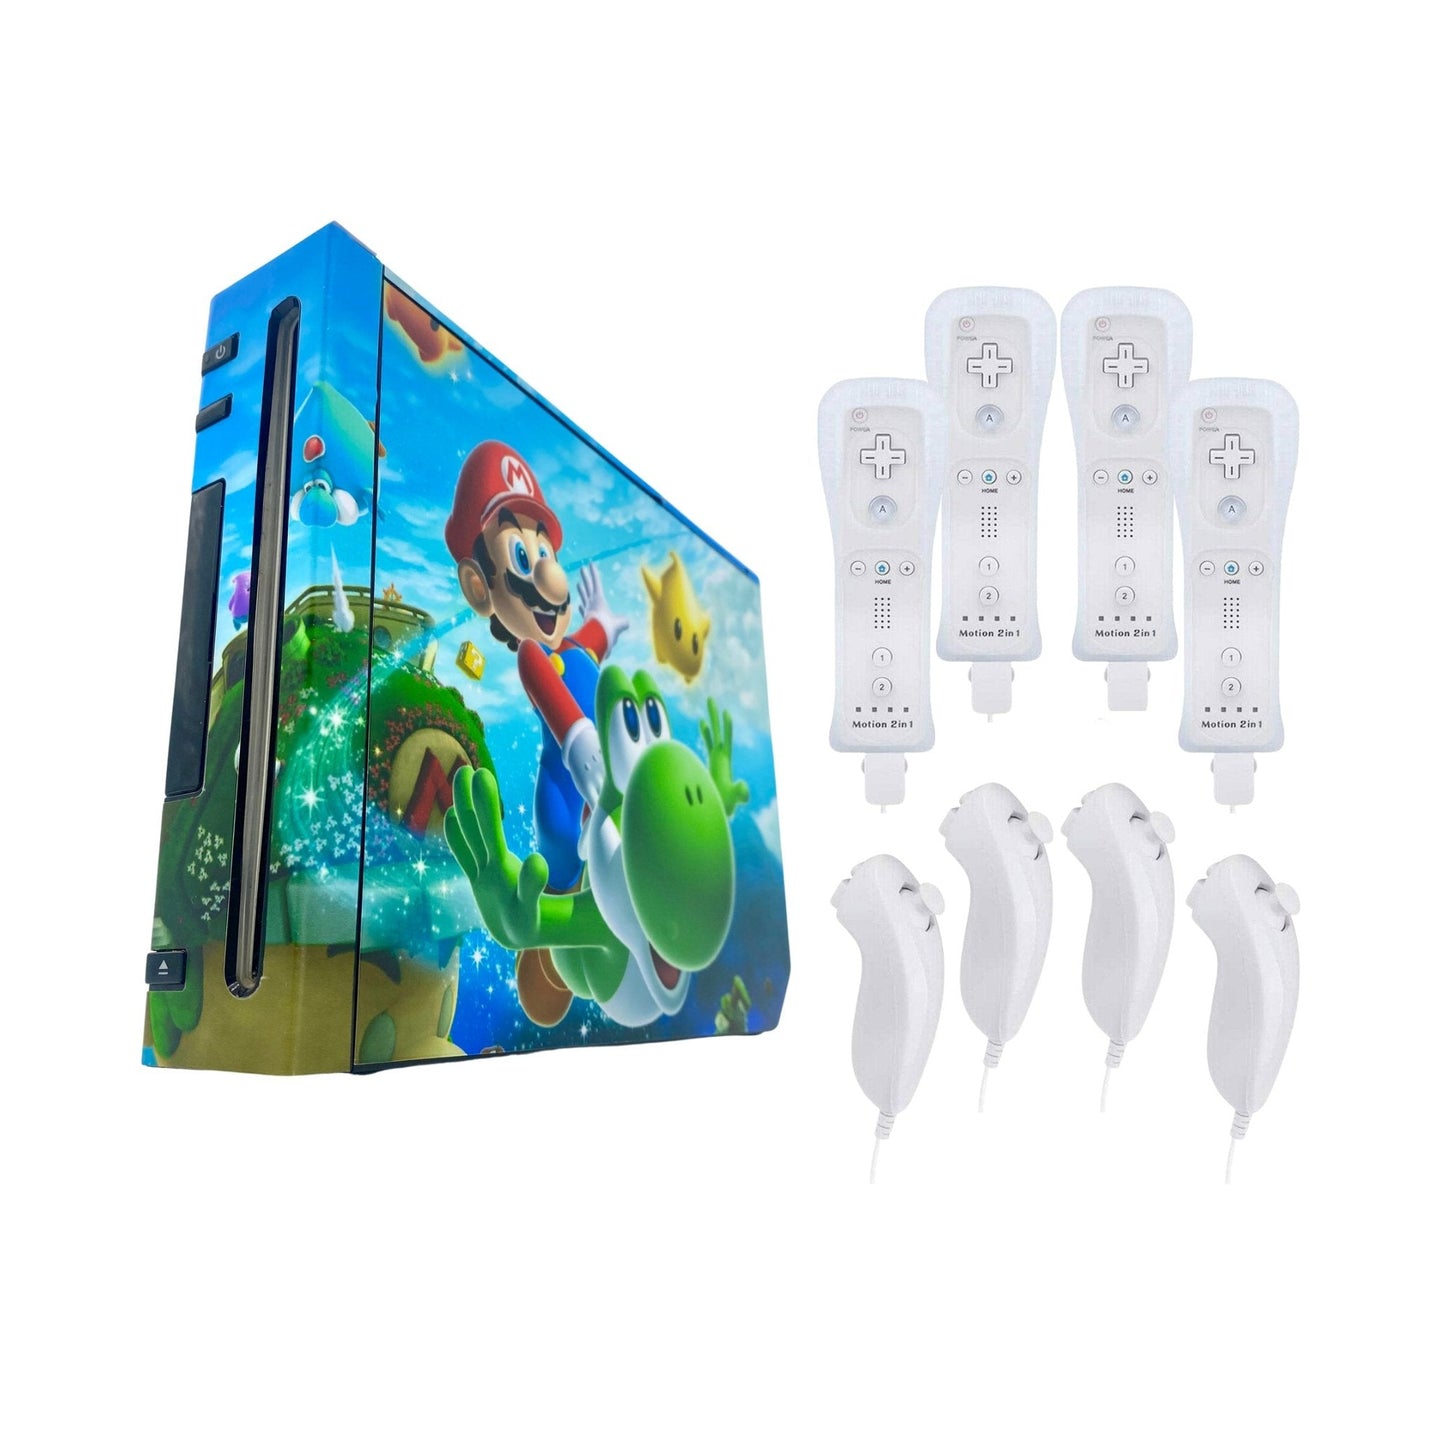 Nintendo Wii Console System - Custom Super Mario Galaxy - Refurbished - Motion Plus Controllers from 2P Gaming